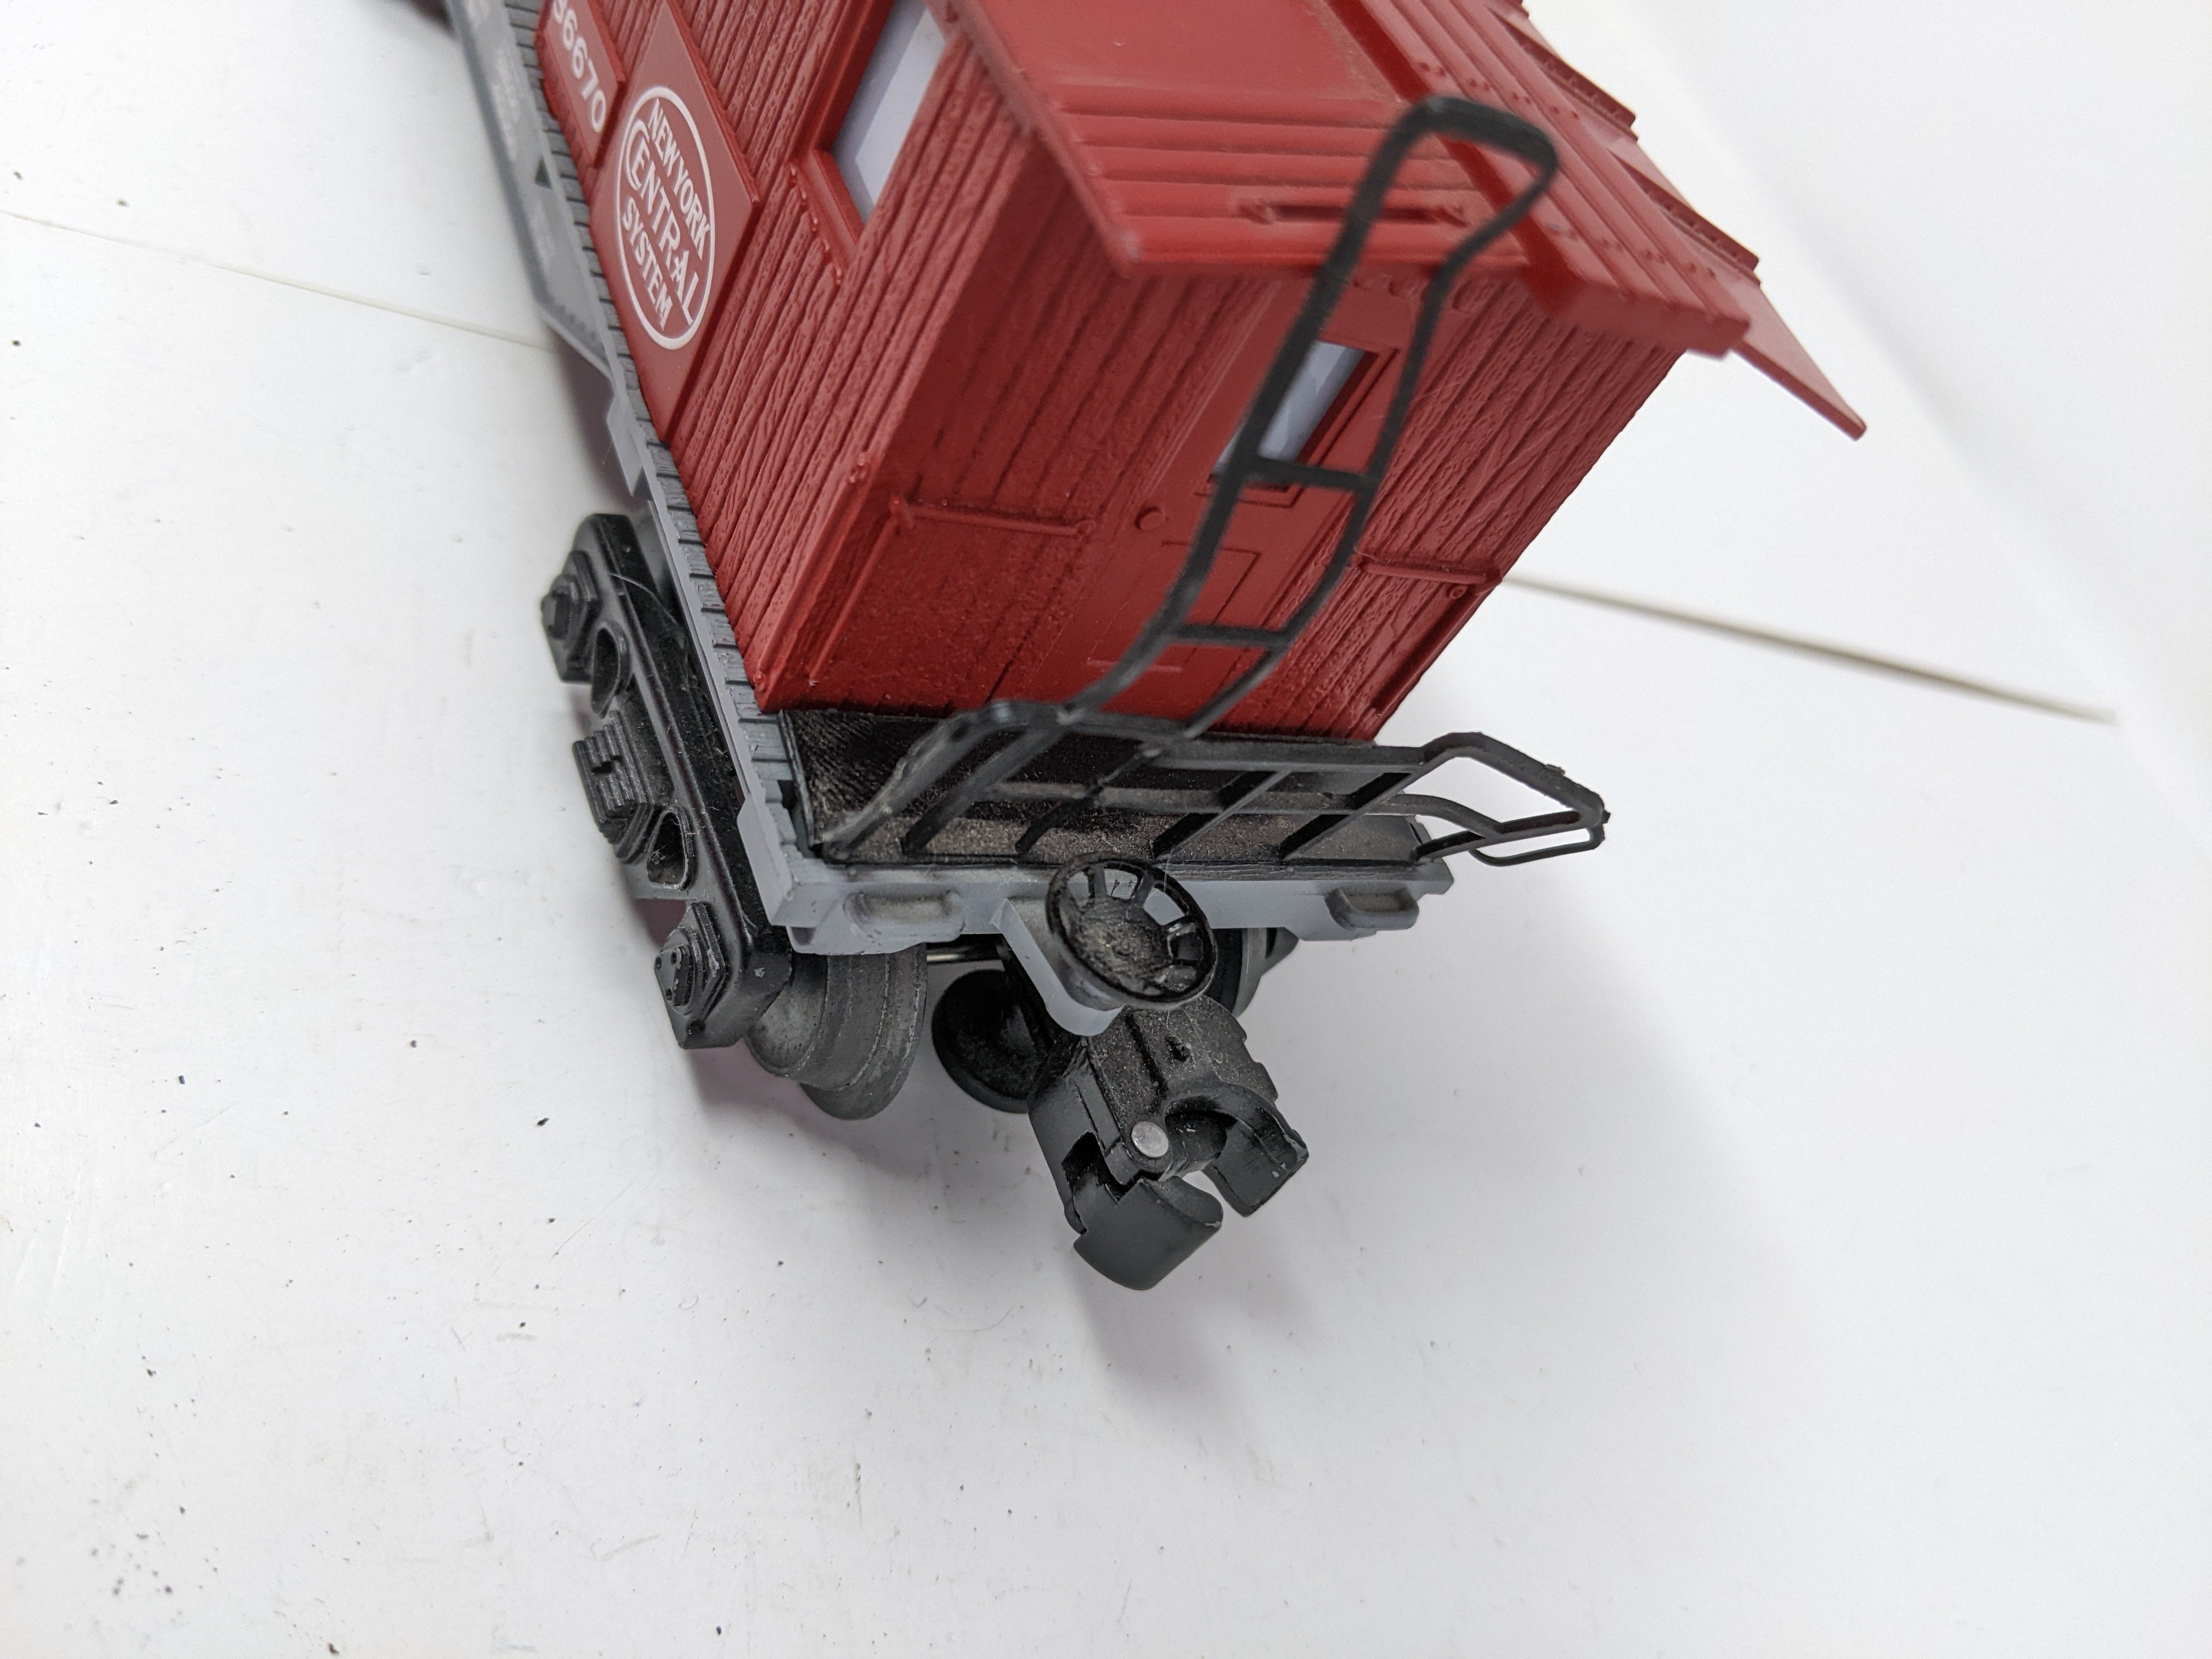 USED Lionel O, Work Caboose, New York Central #36670, Pacemaker Scheme, Read Description